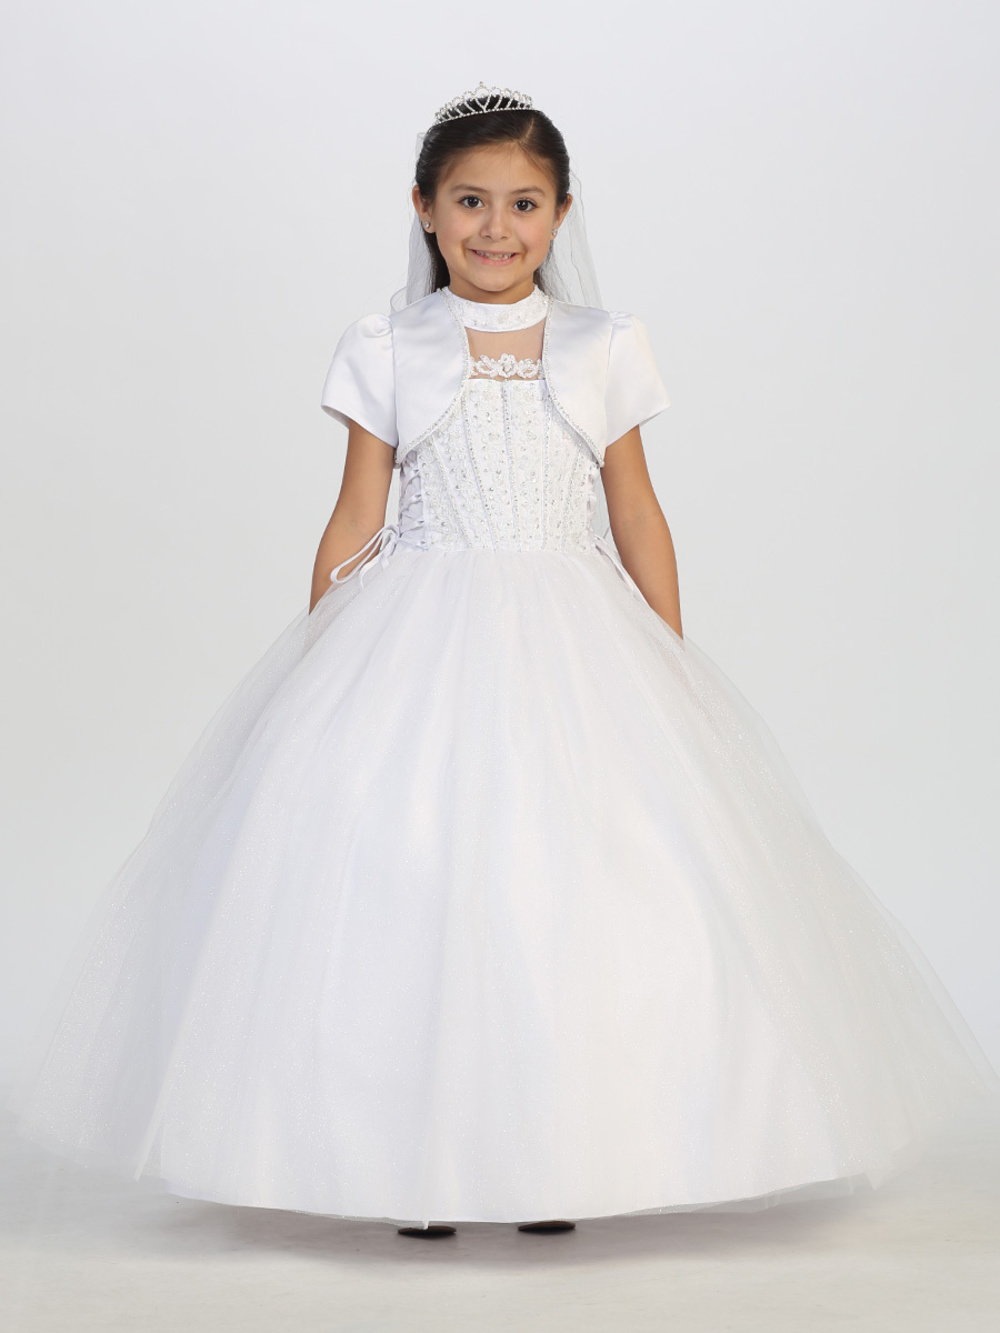 1150 1 — Flower Girl Dresses Fancy Communion Dress Tulle Illusion Neckline With Jeweled High Round Neck, Heavily Embellished With Rhinestones and Applique Lace Bodice.